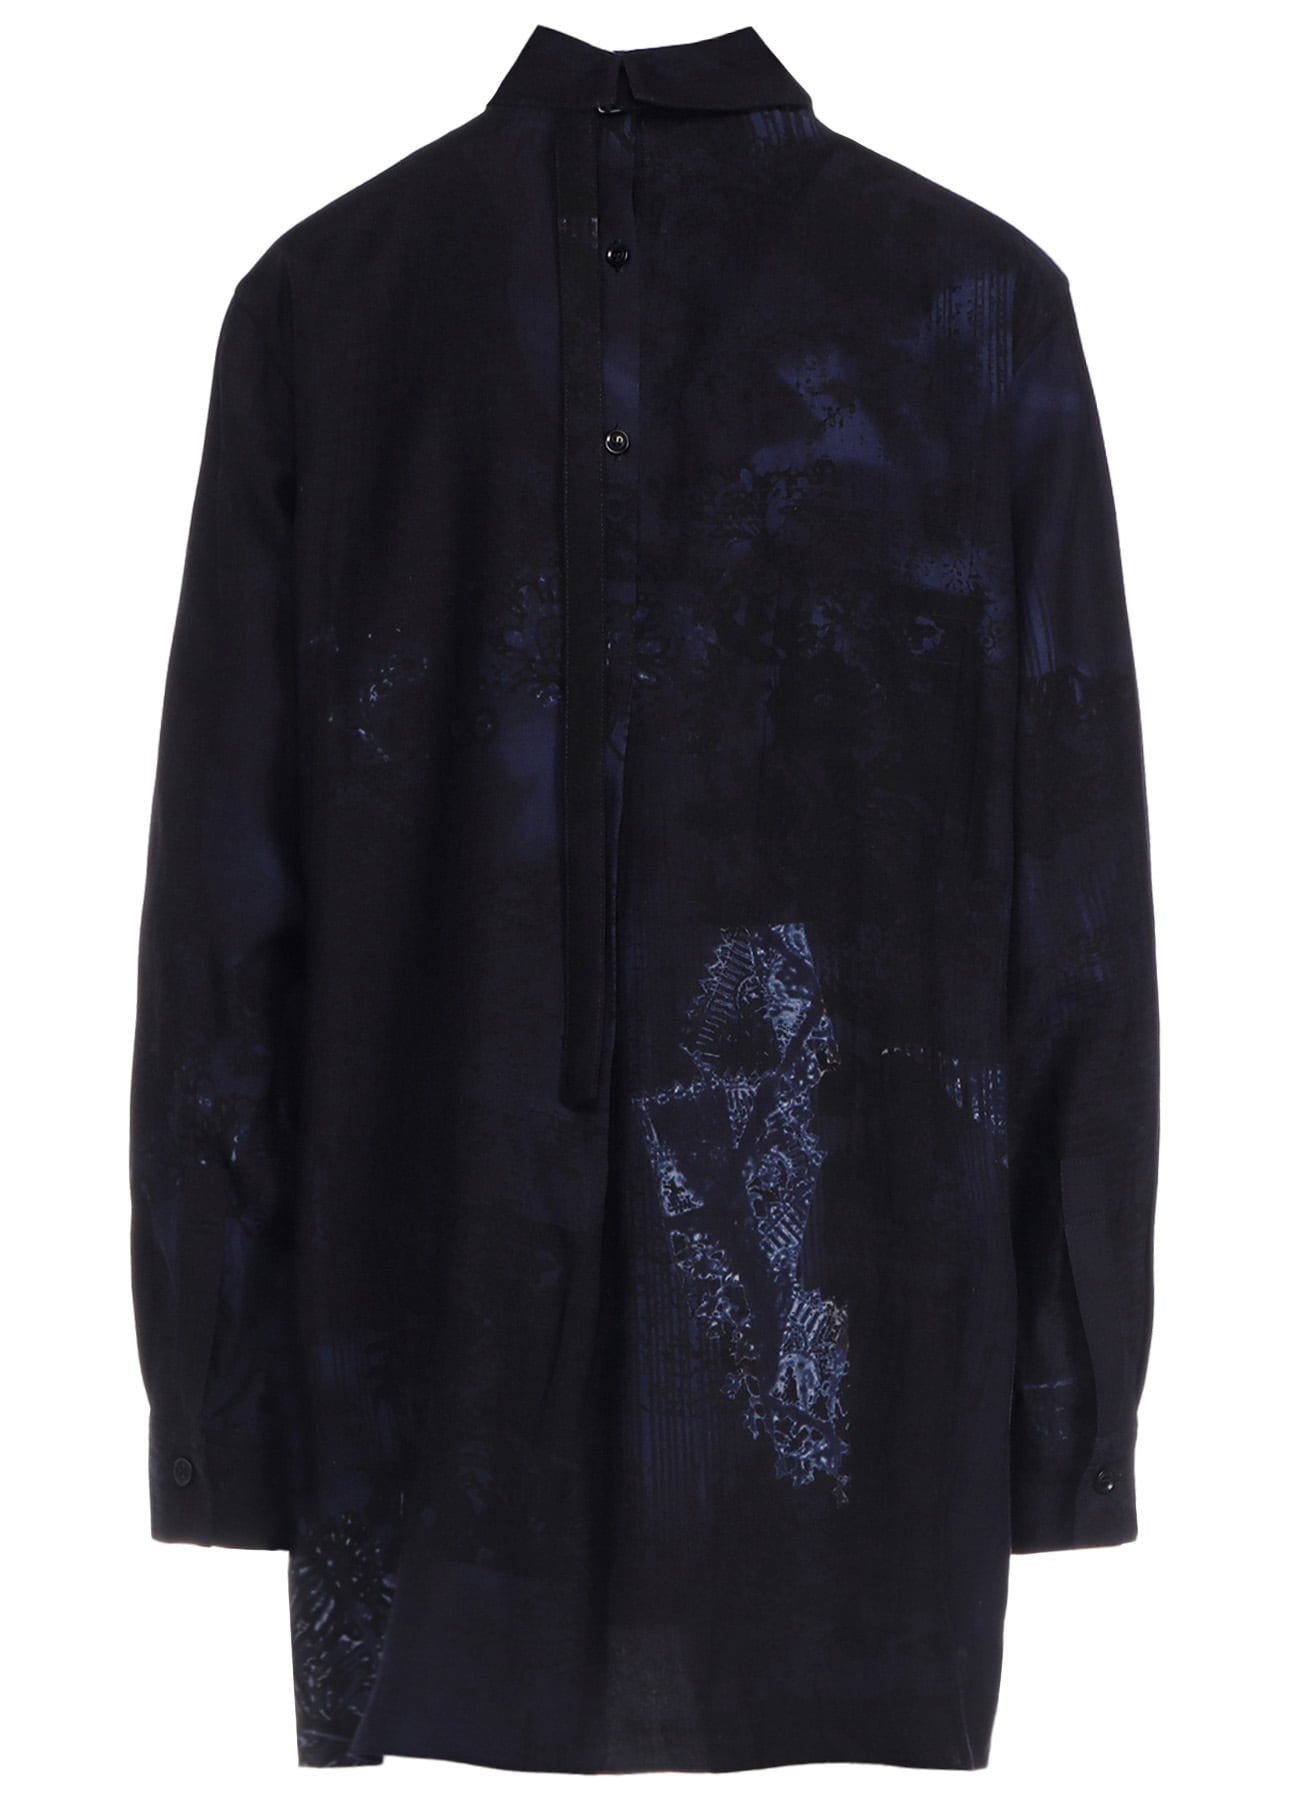 【8/2 12:00(JST) Release】CU/ TWILL LACE DESIGN PT BACK TUCKED OPEN BLOUSE